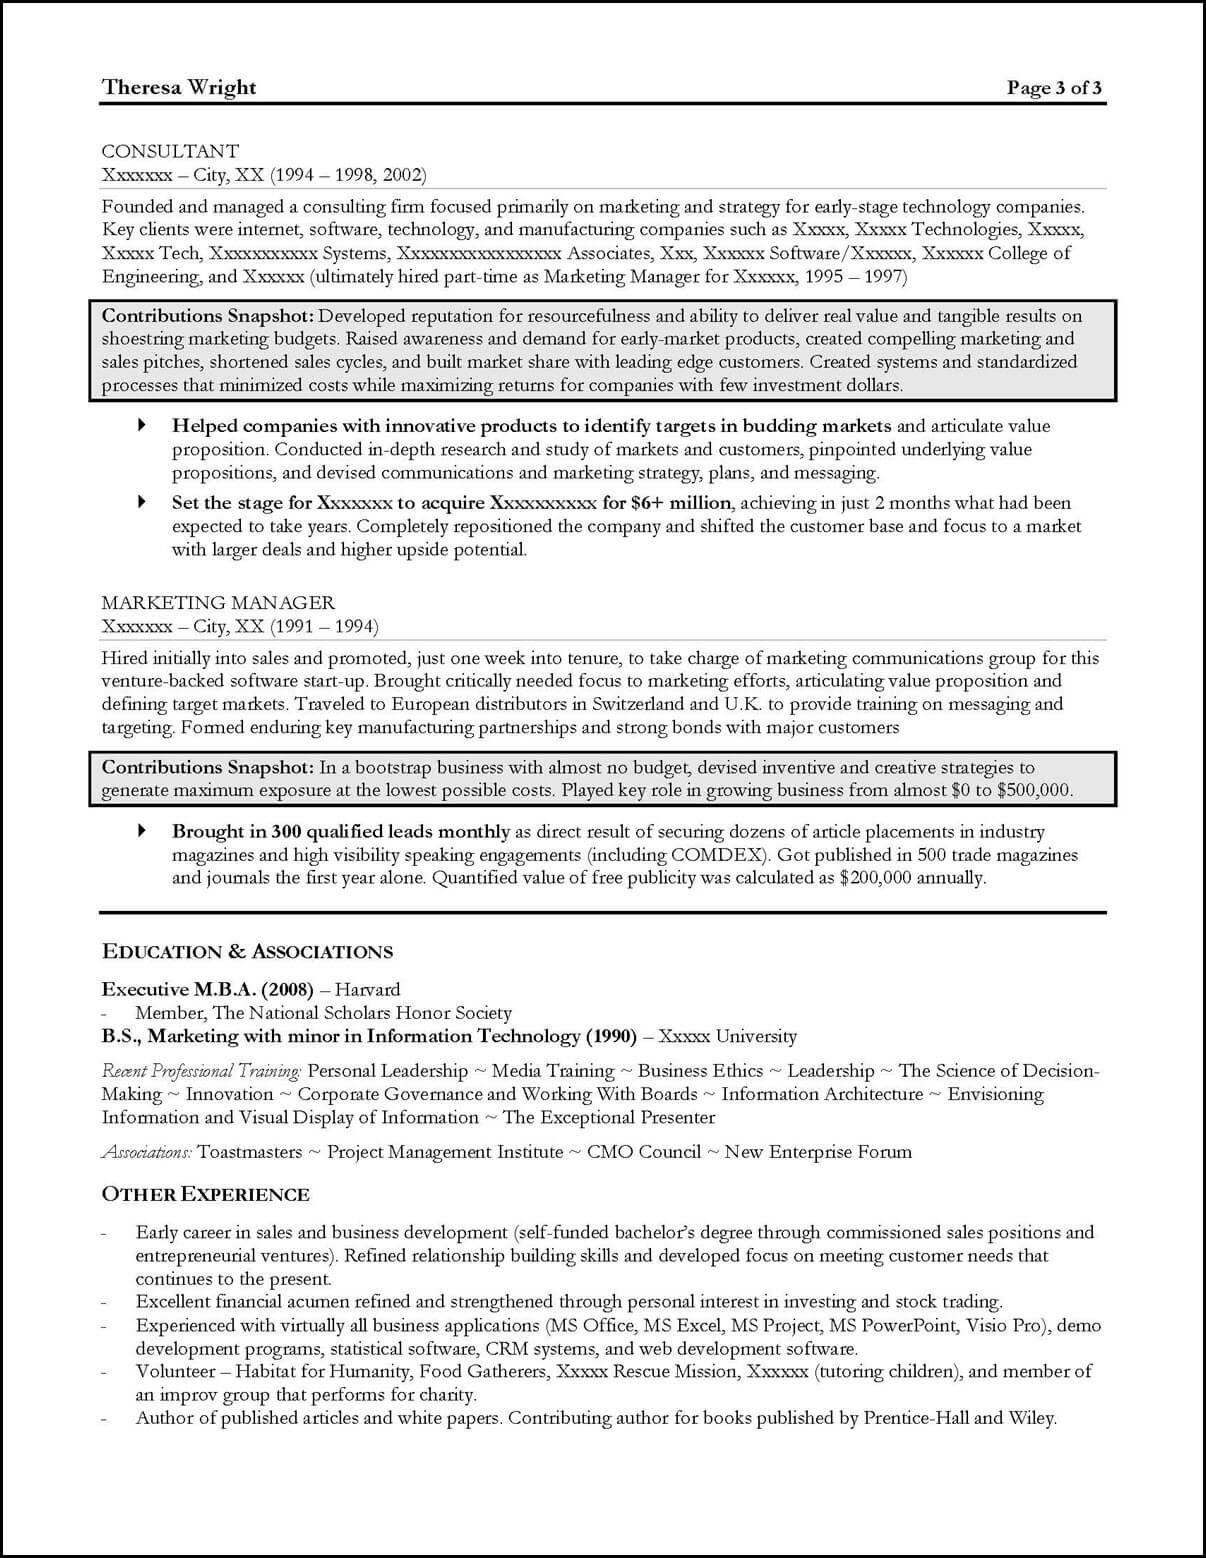 Consultant Resume Yahoo Image Search Results Resume with dimensions 1206 X 1558